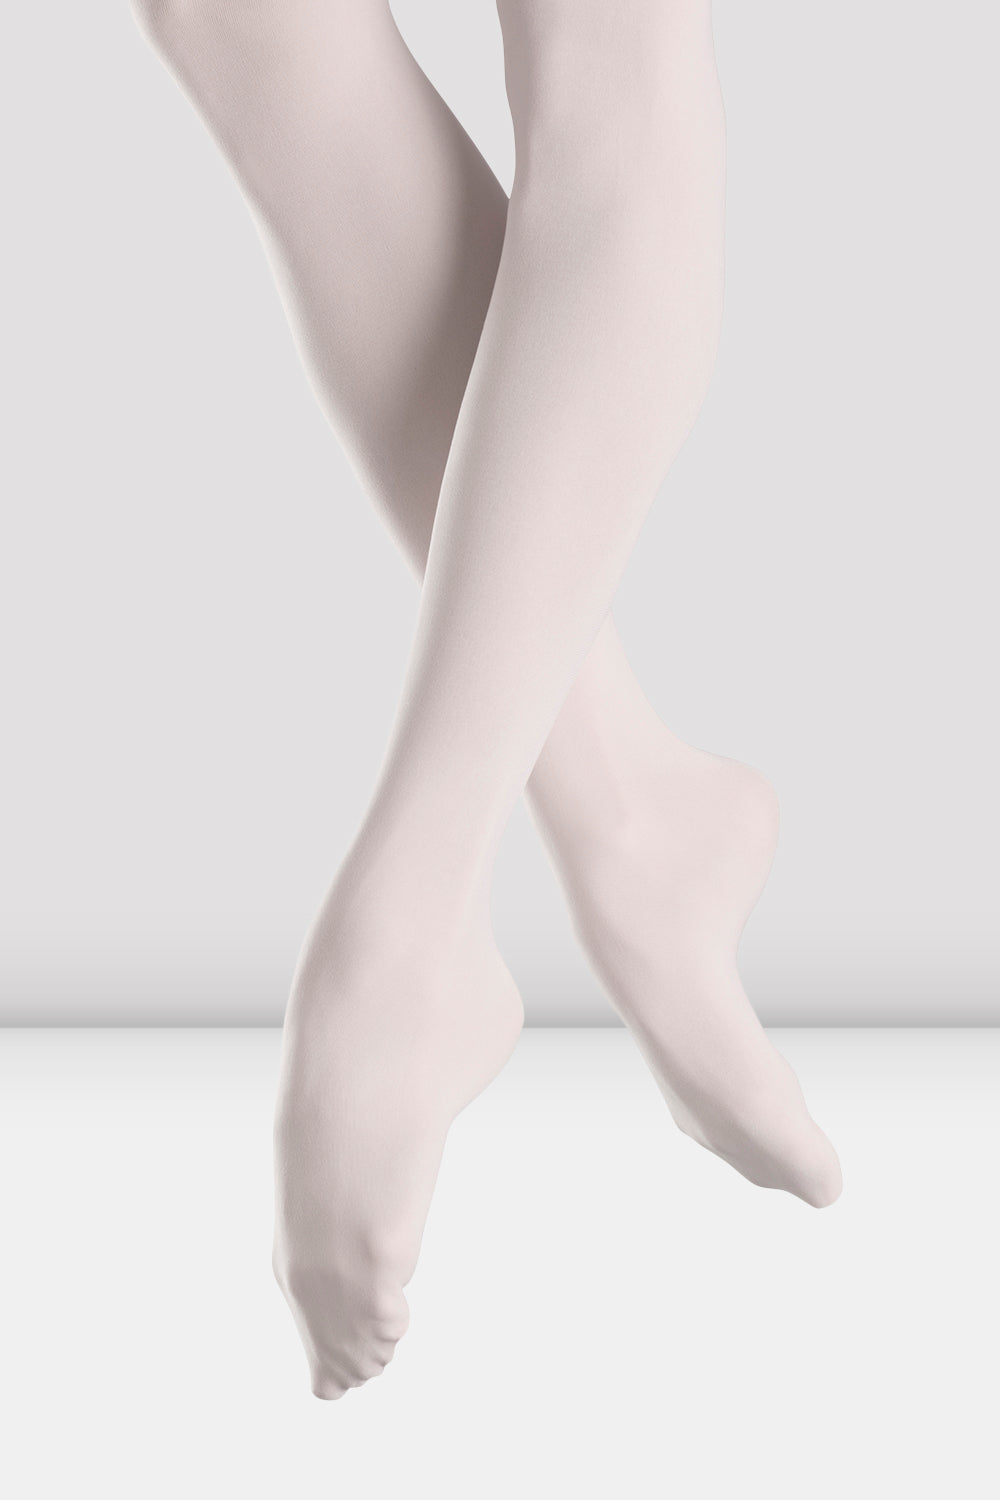 GIRLS FOOTED SKIN COLOR TIGHTS DANCE TIGHTS DANCE TIGHT FOOT TIGHTS FOOTED  TIGHT